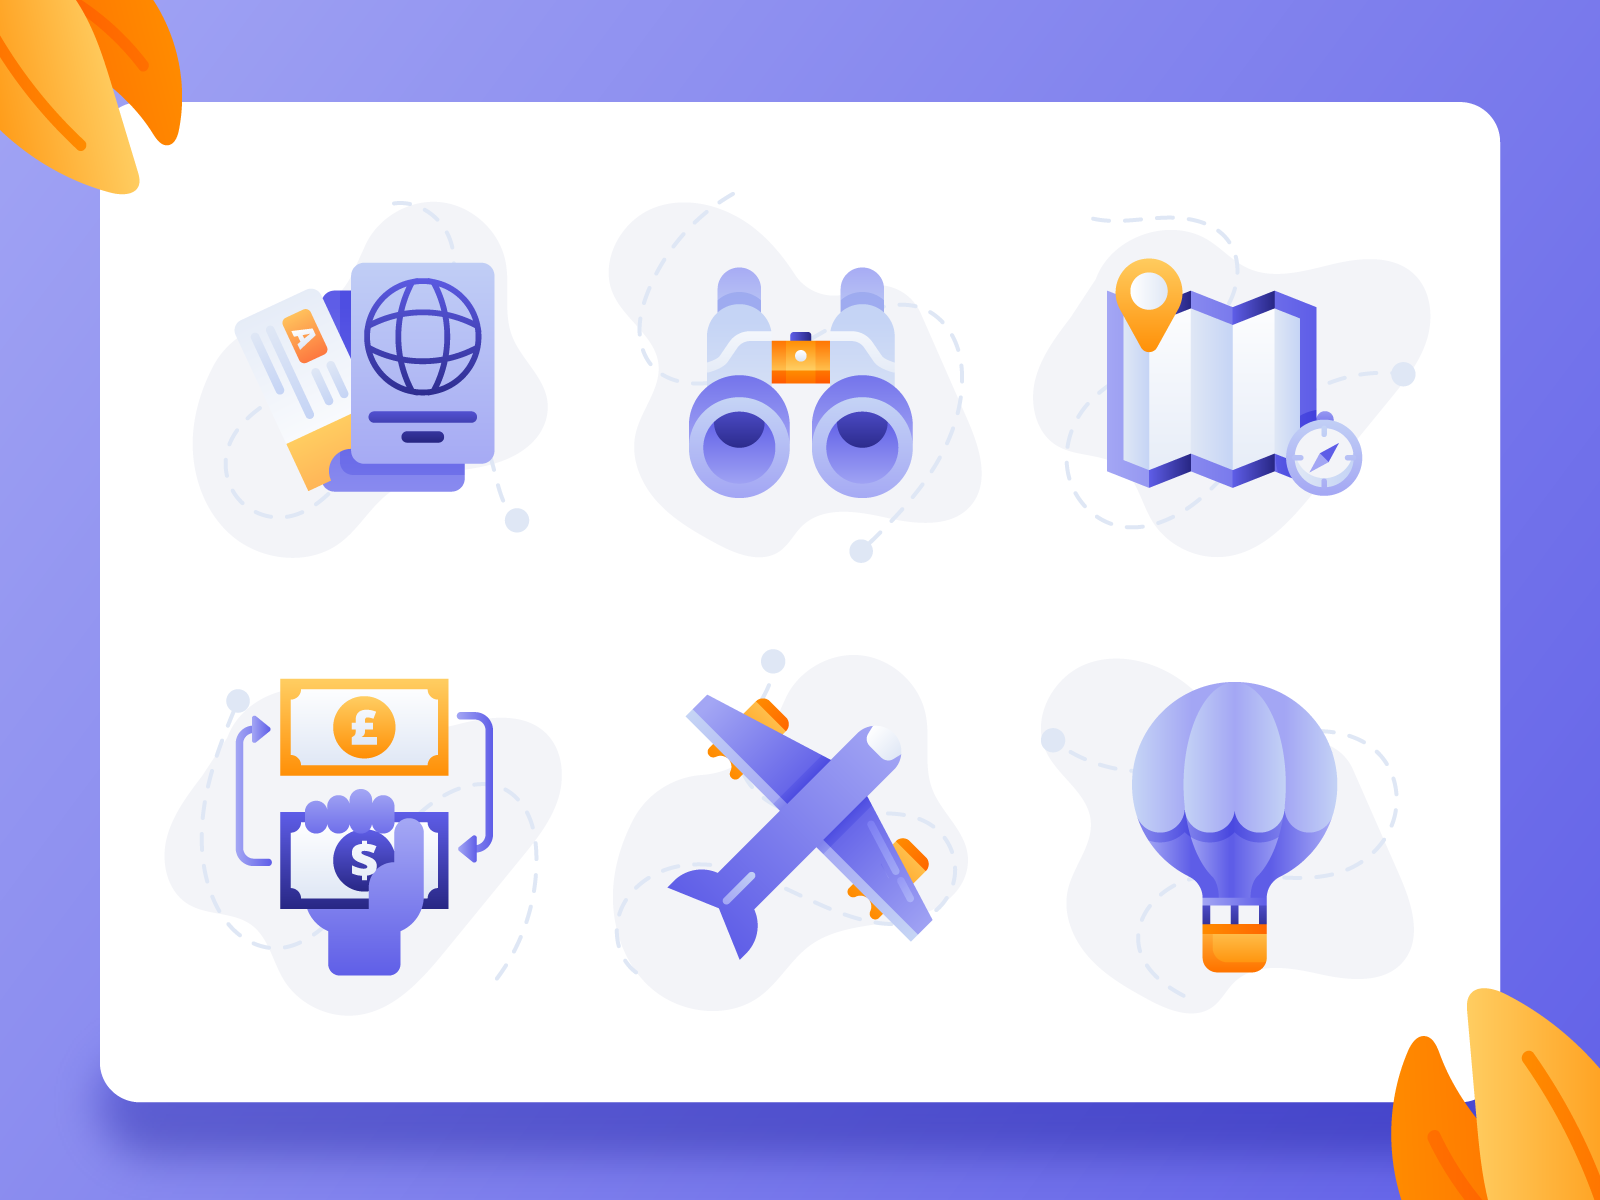 Travel Startup Icons 1 modern flat hot air baloon map money exchange flight plane passport ux ui 2d icon design icon set vacation holiday booking app travel app travel startup startup travel